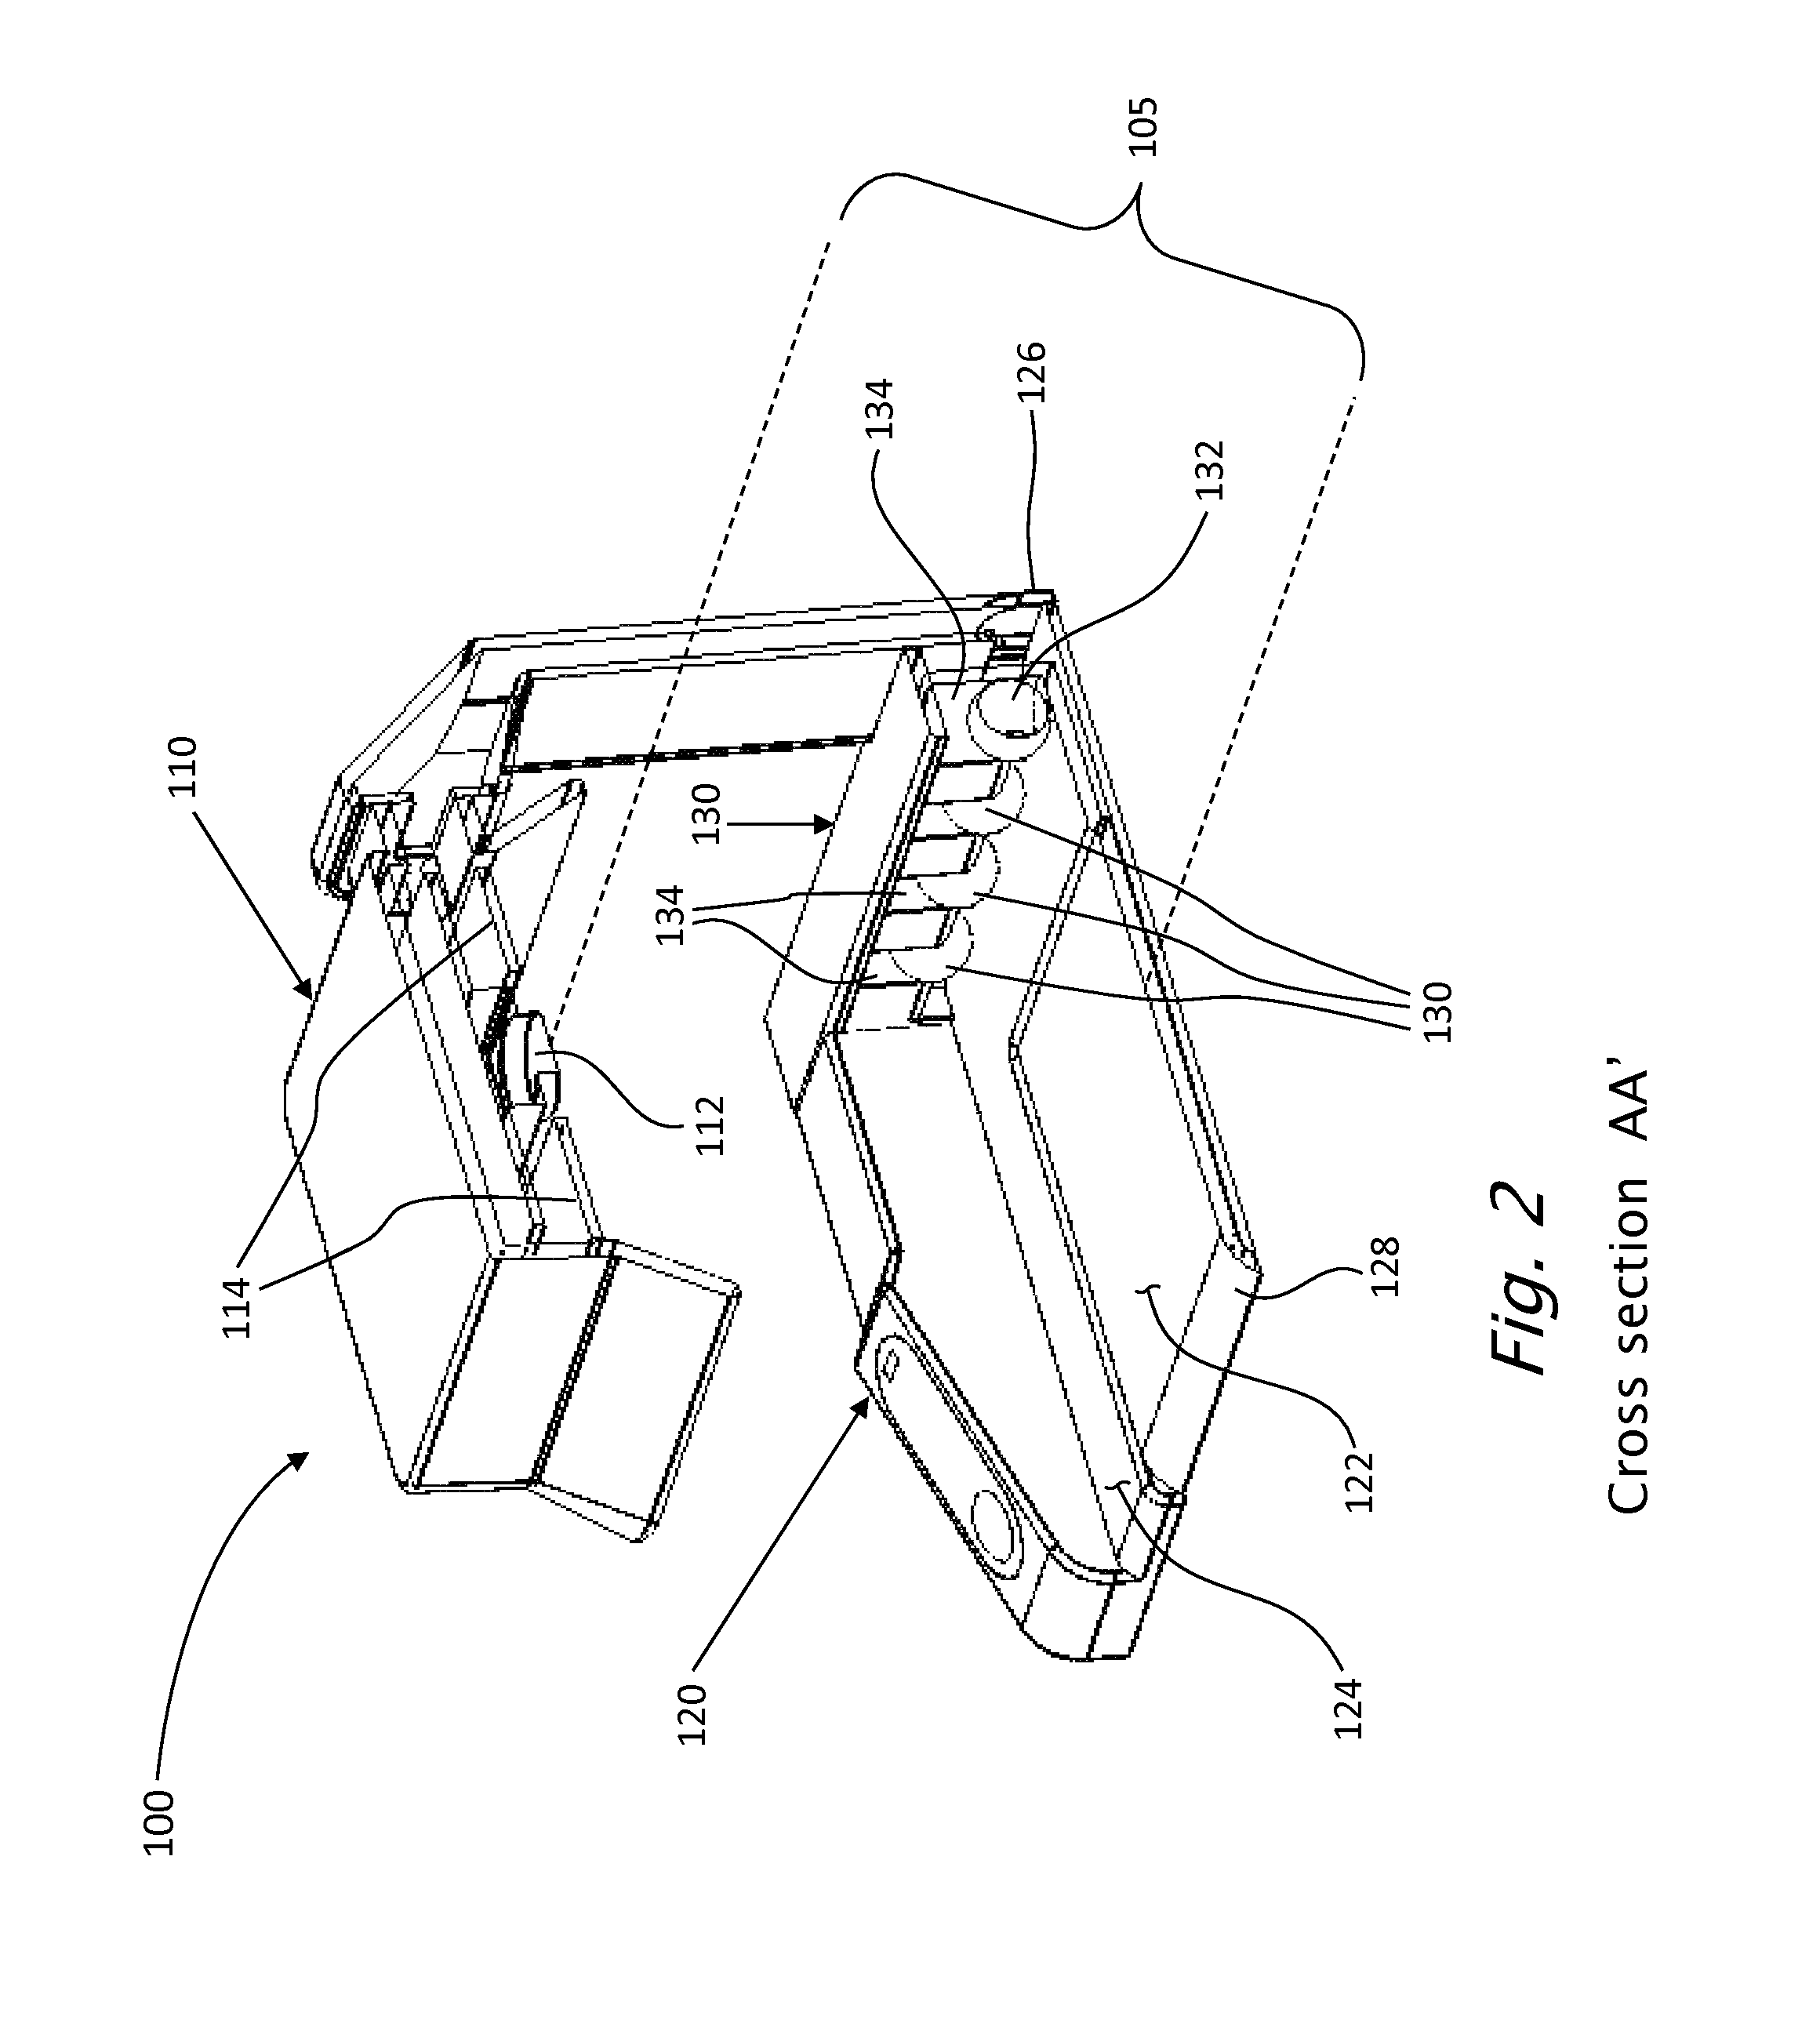 Apparatus and method for reading ID documents in an open environment